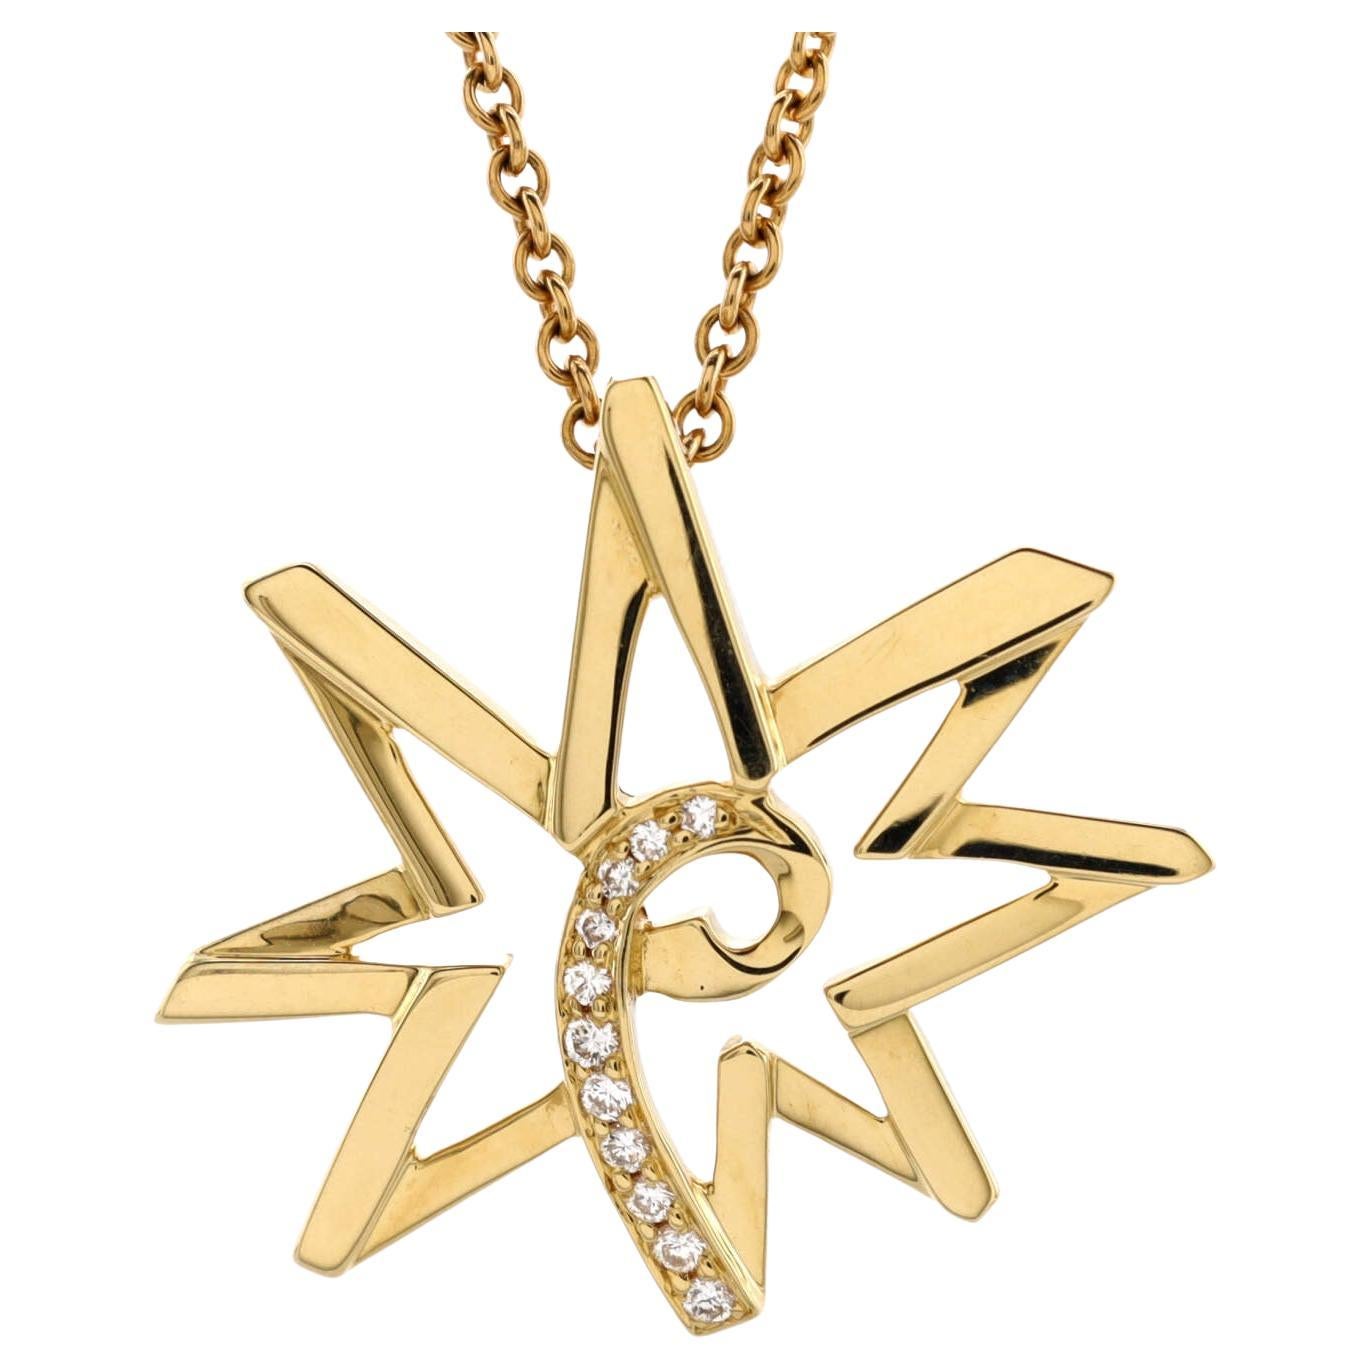 Tiffany & Co. Paloma Picasso Star Pendant Necklace 18K Yellow Gold with Diamonds